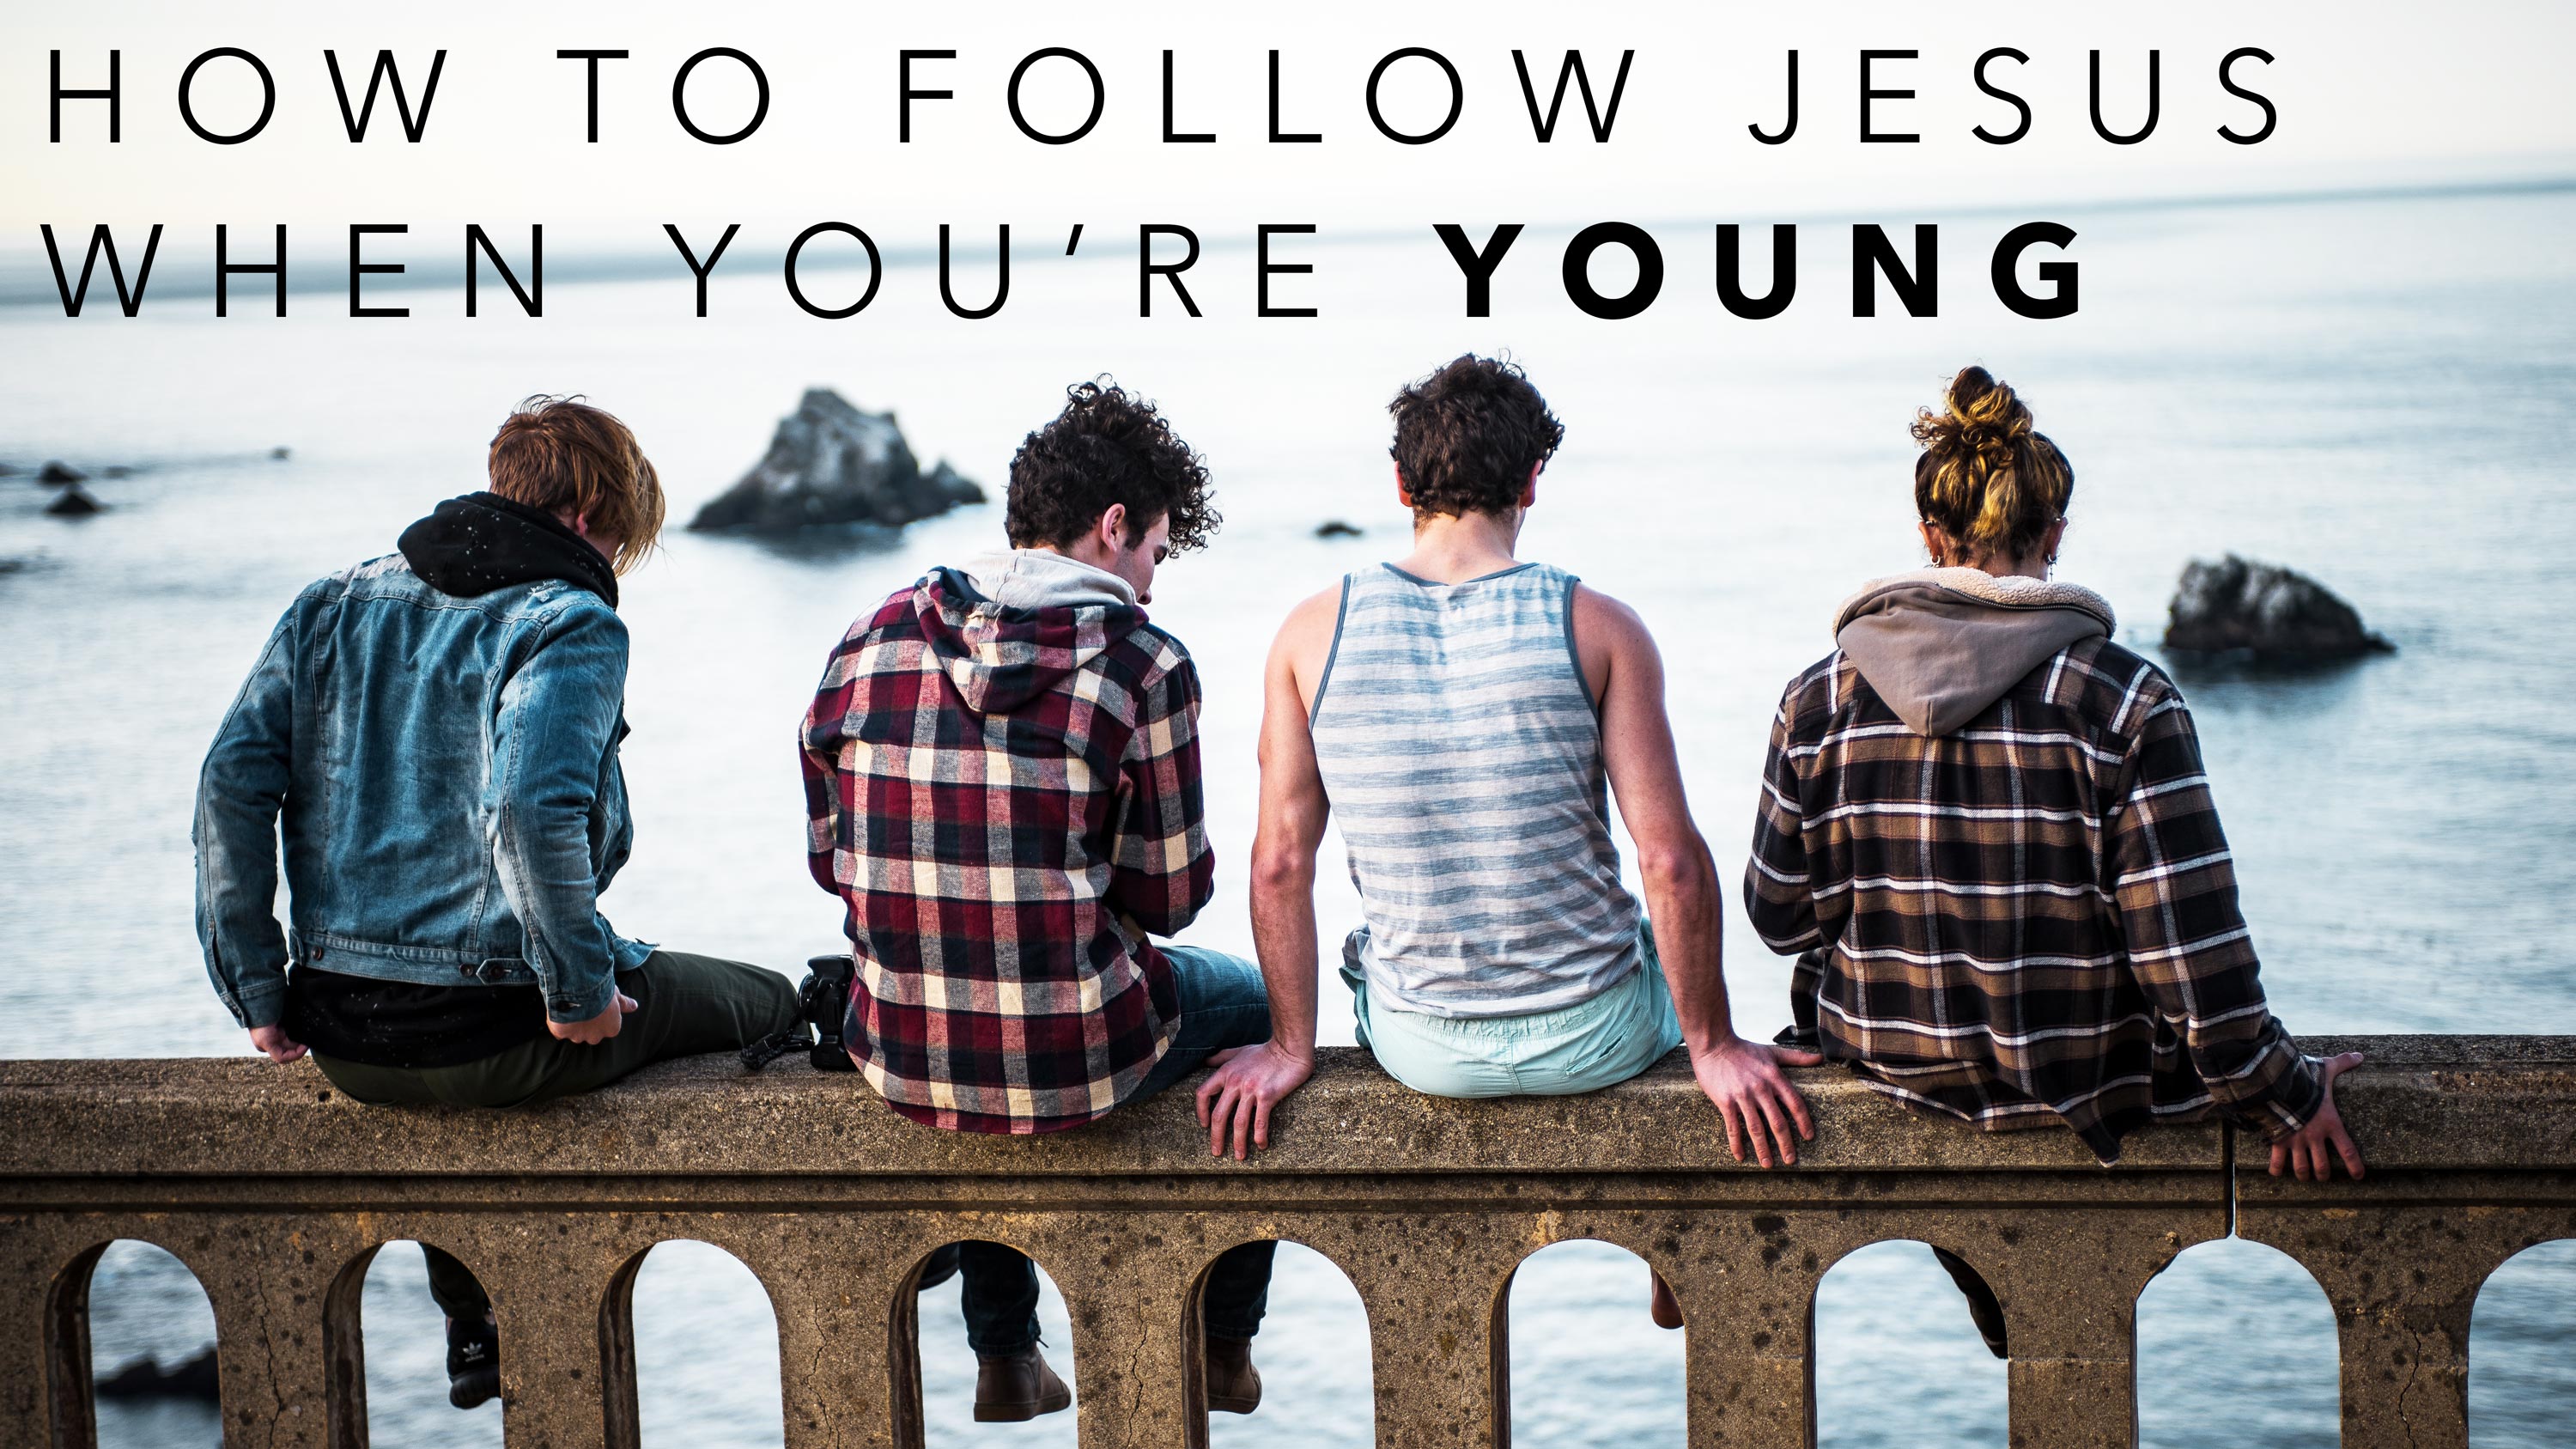 How To Follow Jesus When You’re Young